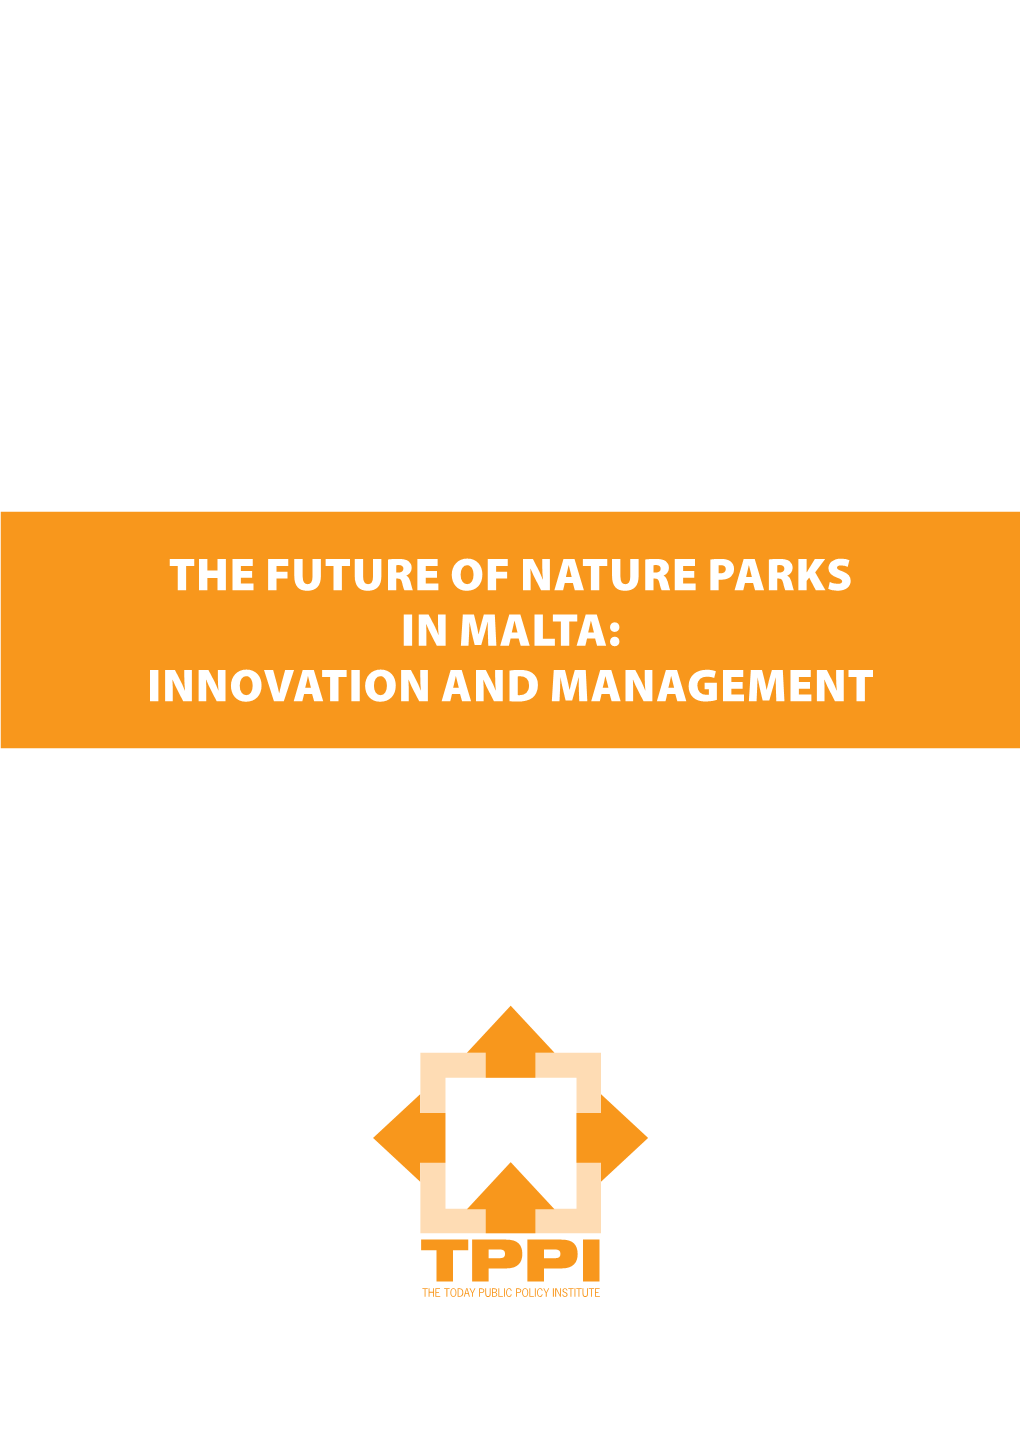 The Future of Nature Parks in Malta: Innovation and Management